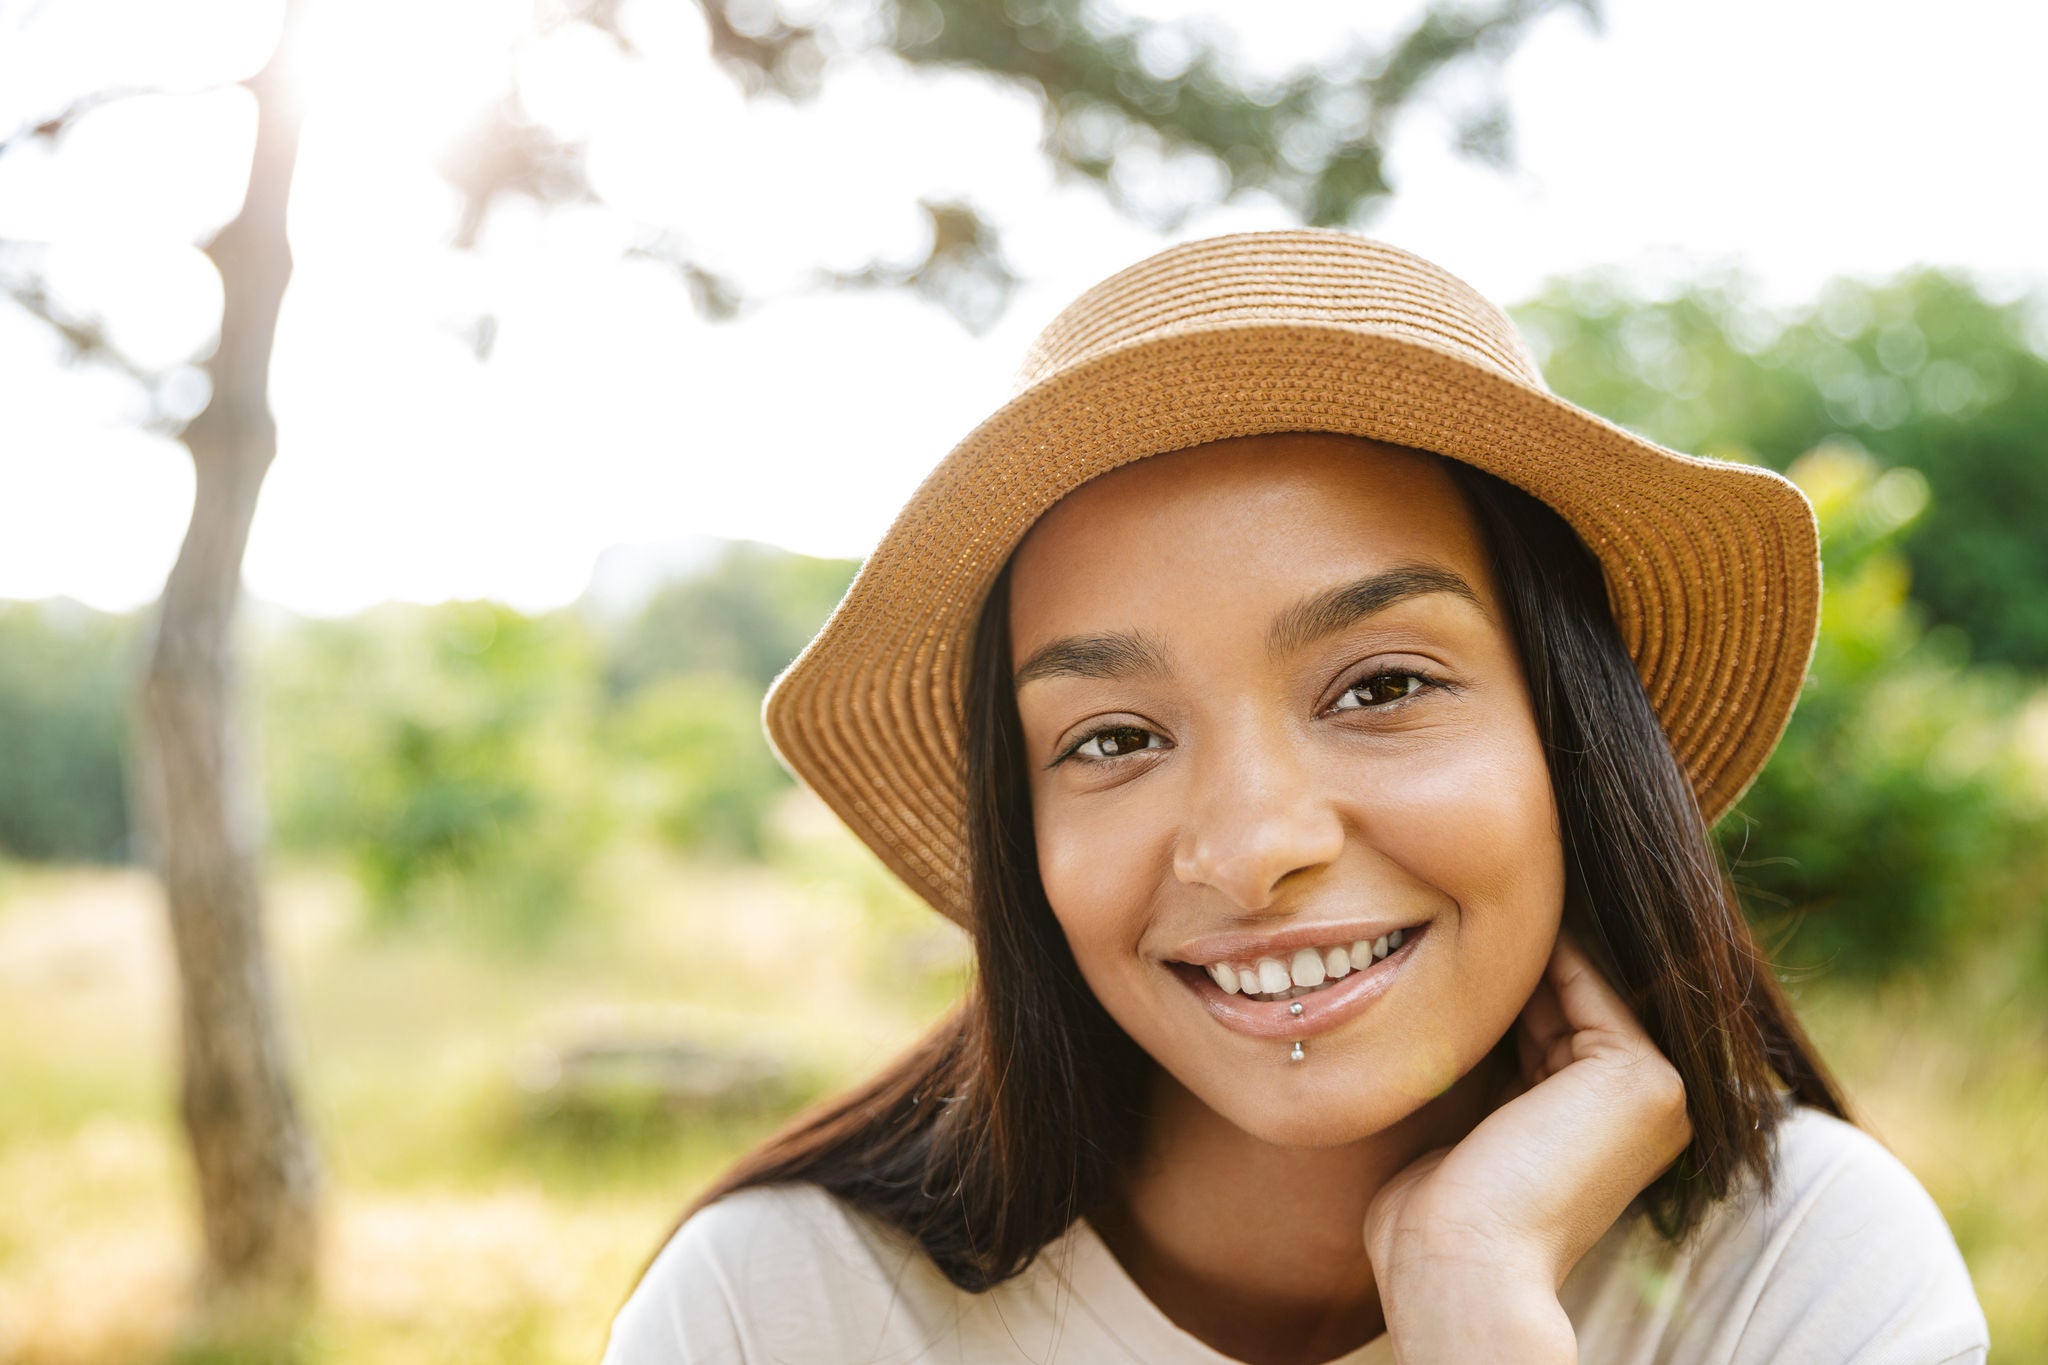 Photo of cheerful woman wearing straw hat and lip piercing smiling at camera while walking in green park